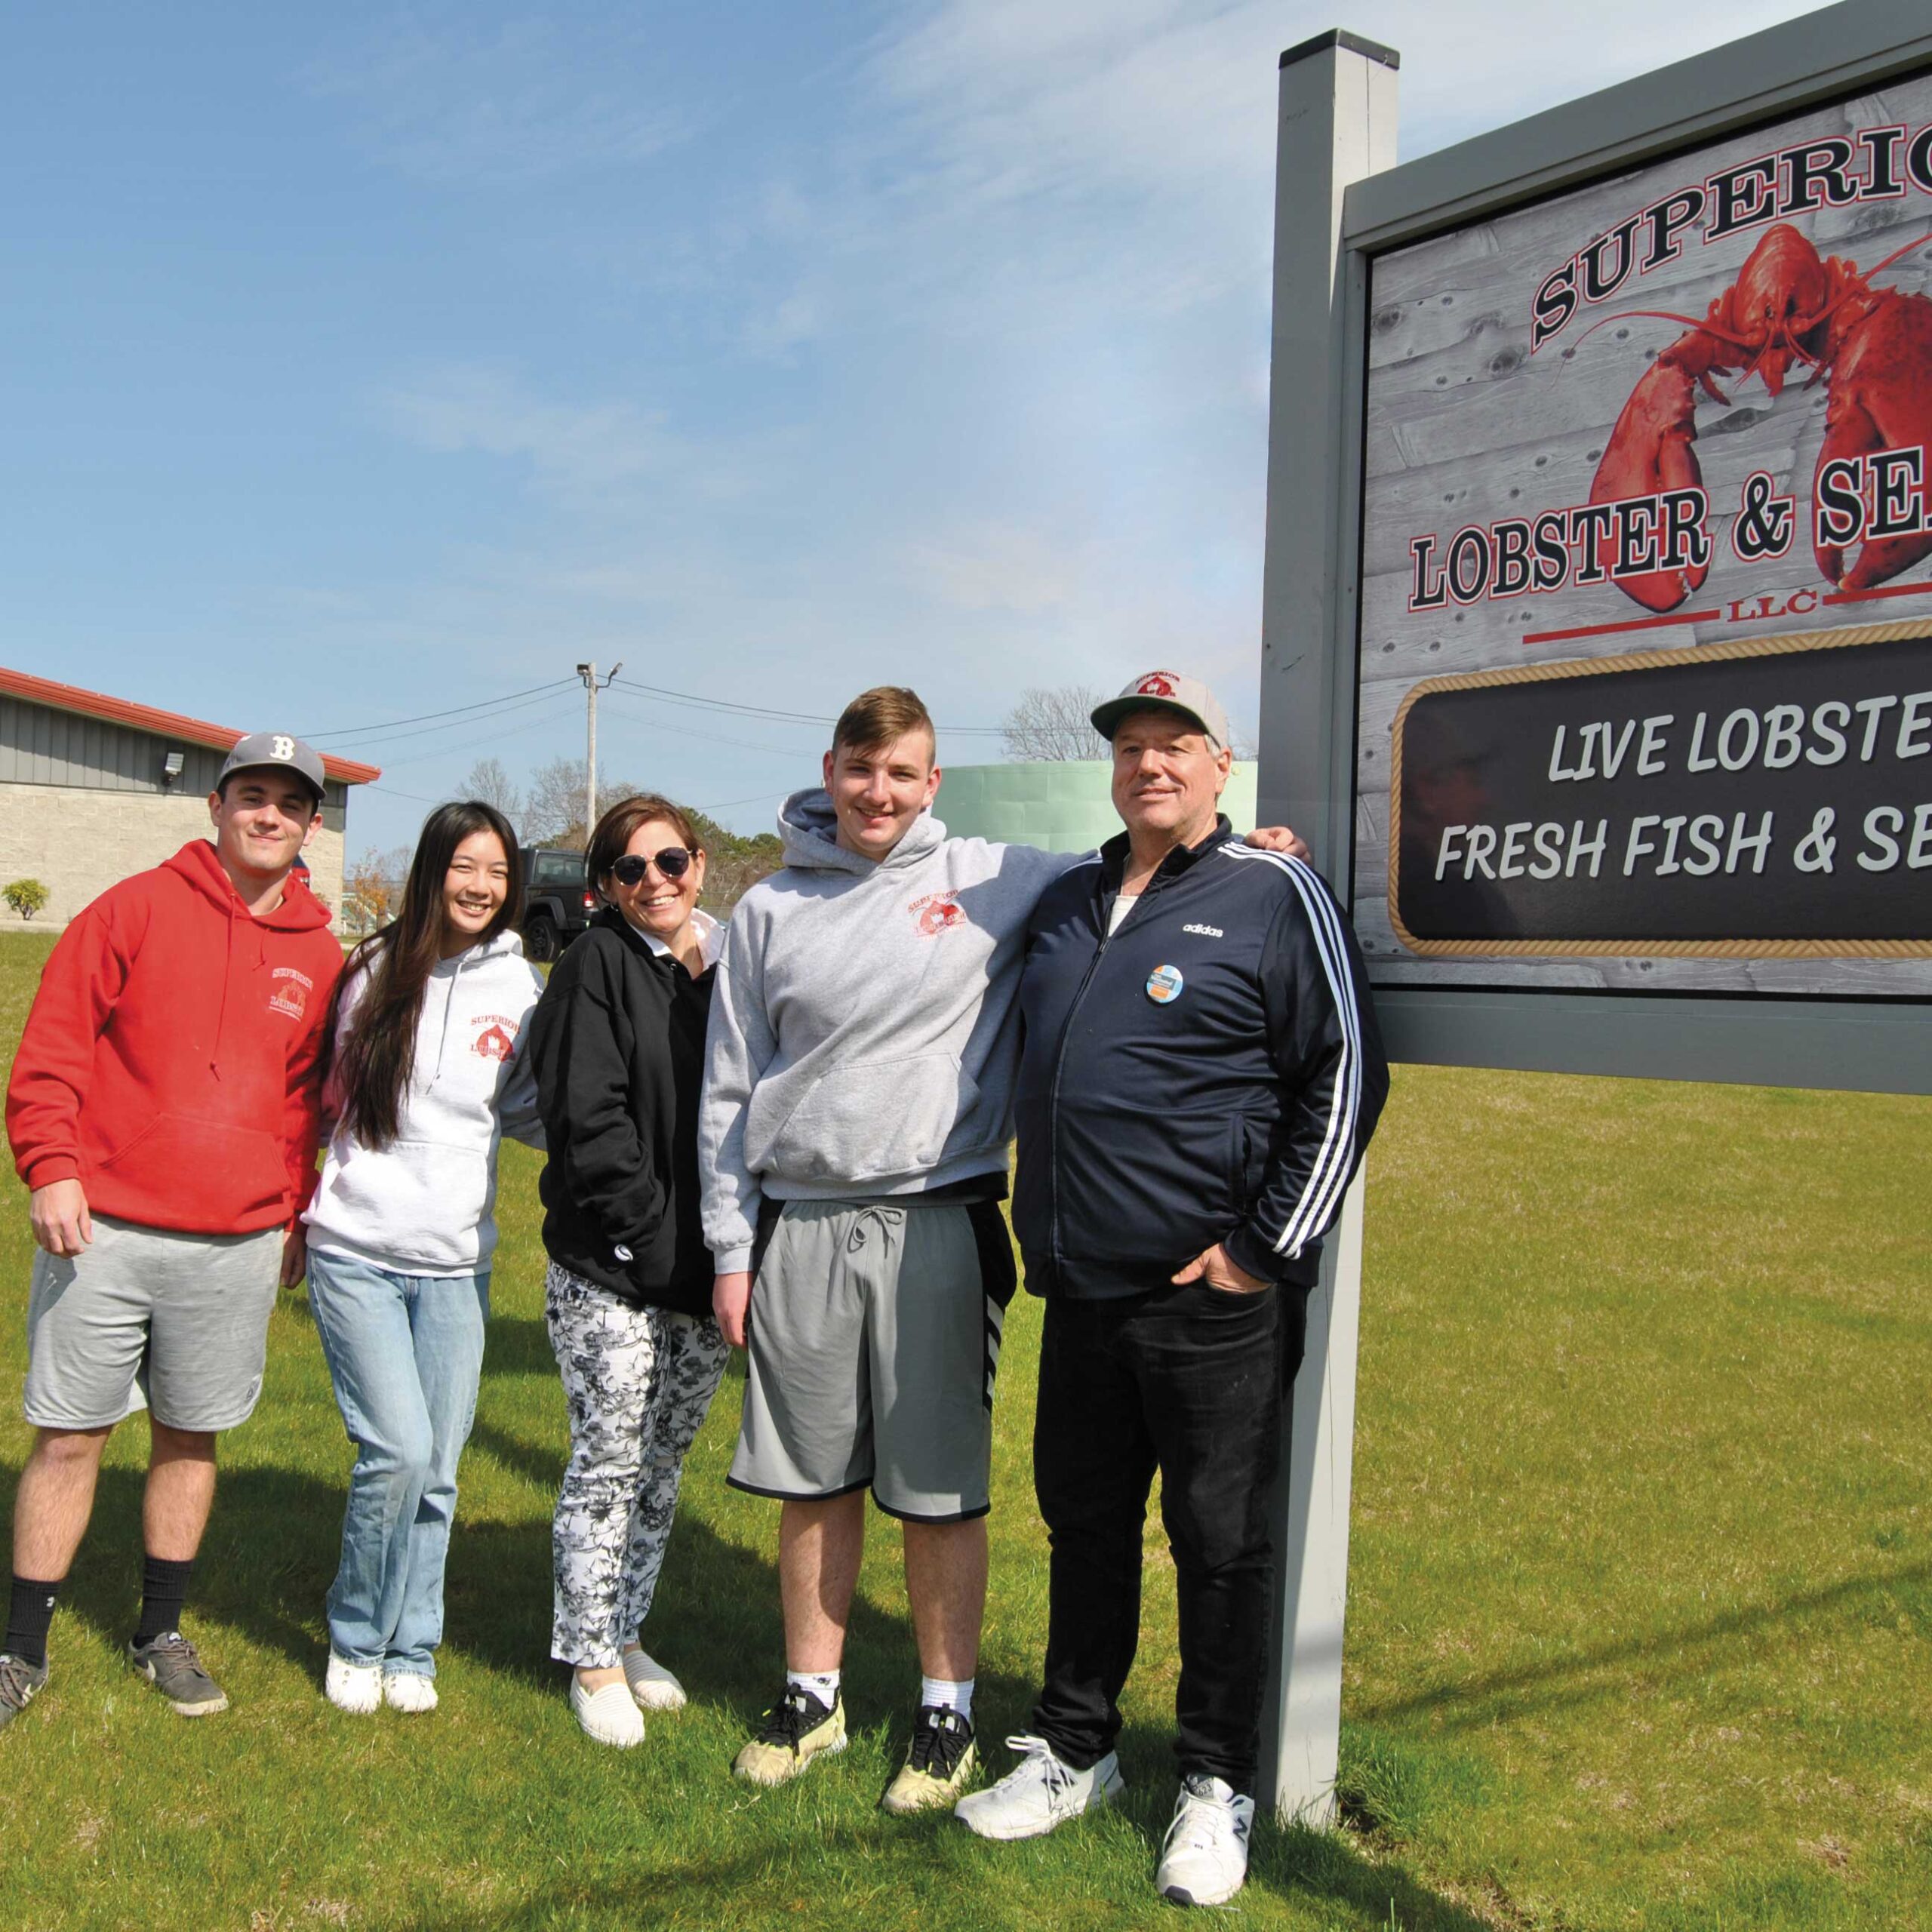 Superior Lobster Comes to Sandwich